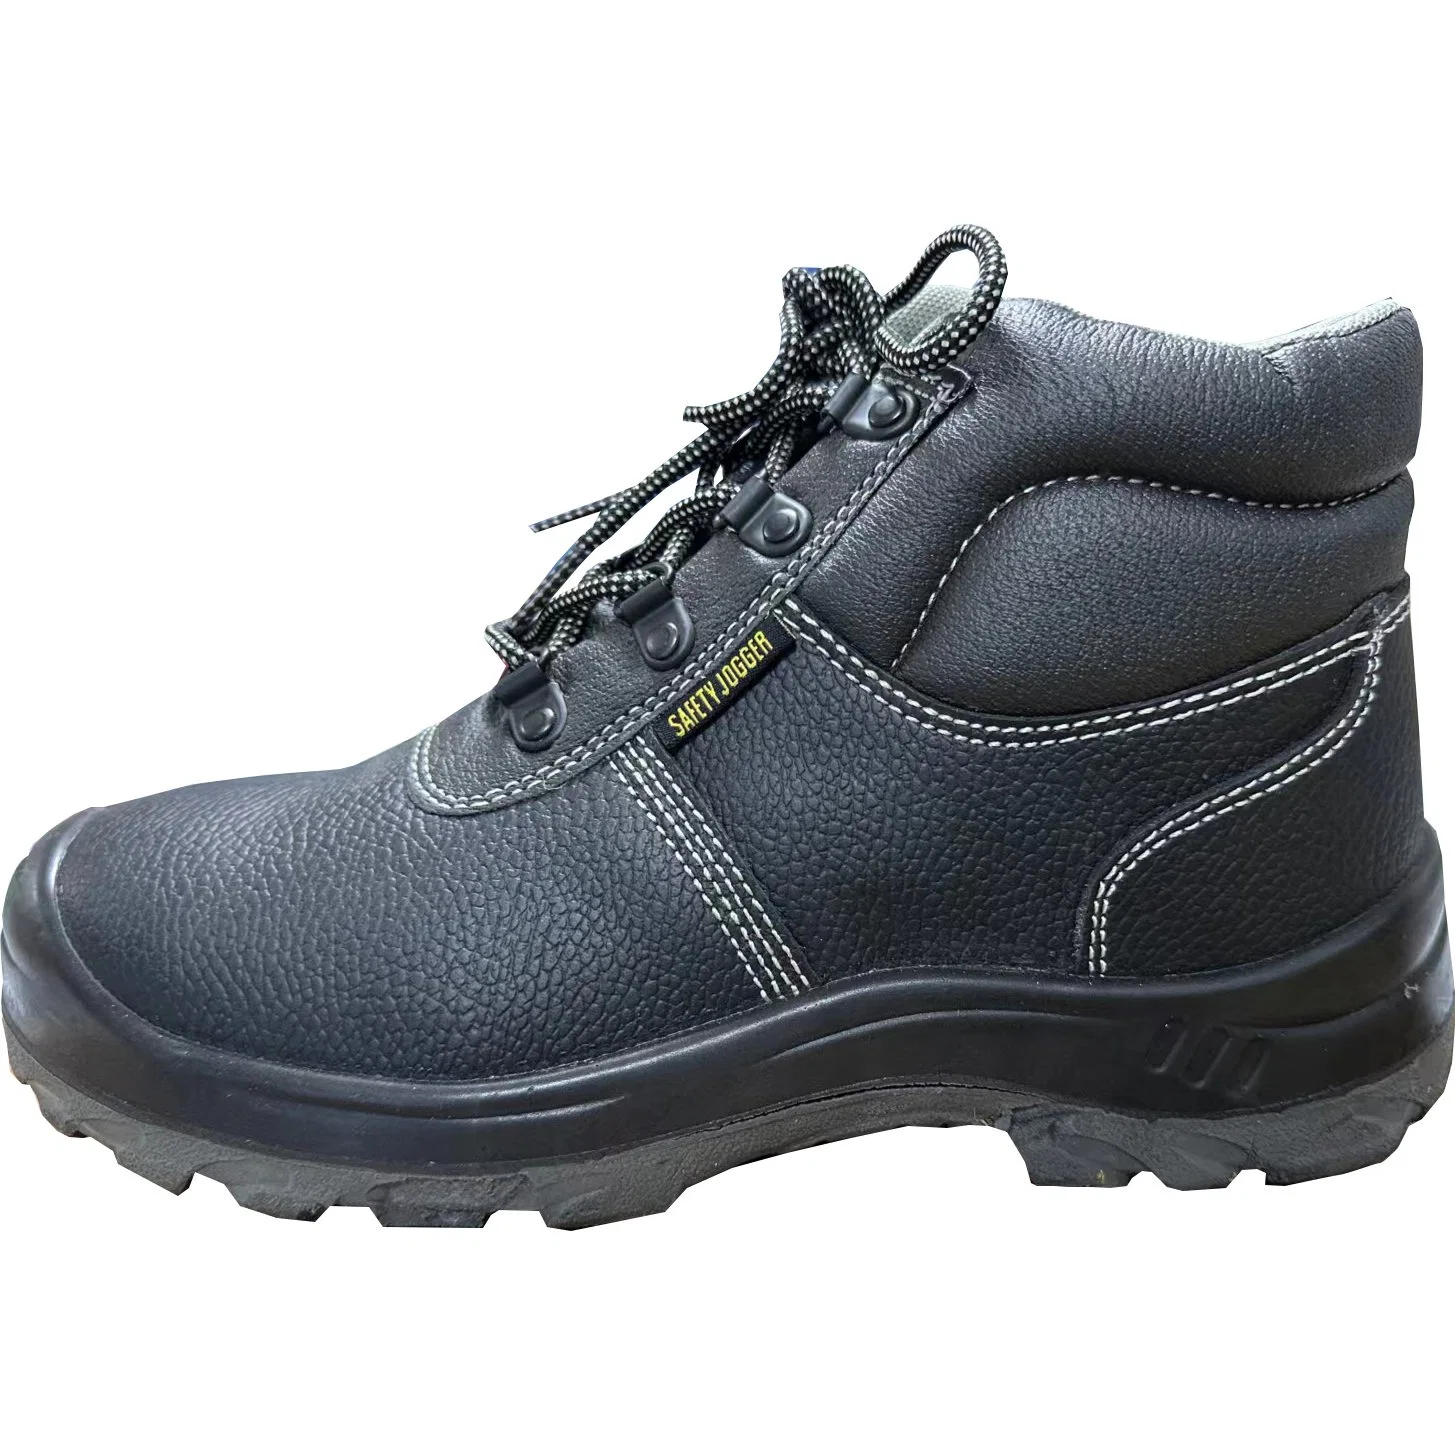 SLS-Gk007 PU Injection Moulding Buffalo Leather Safety Shoes for Men